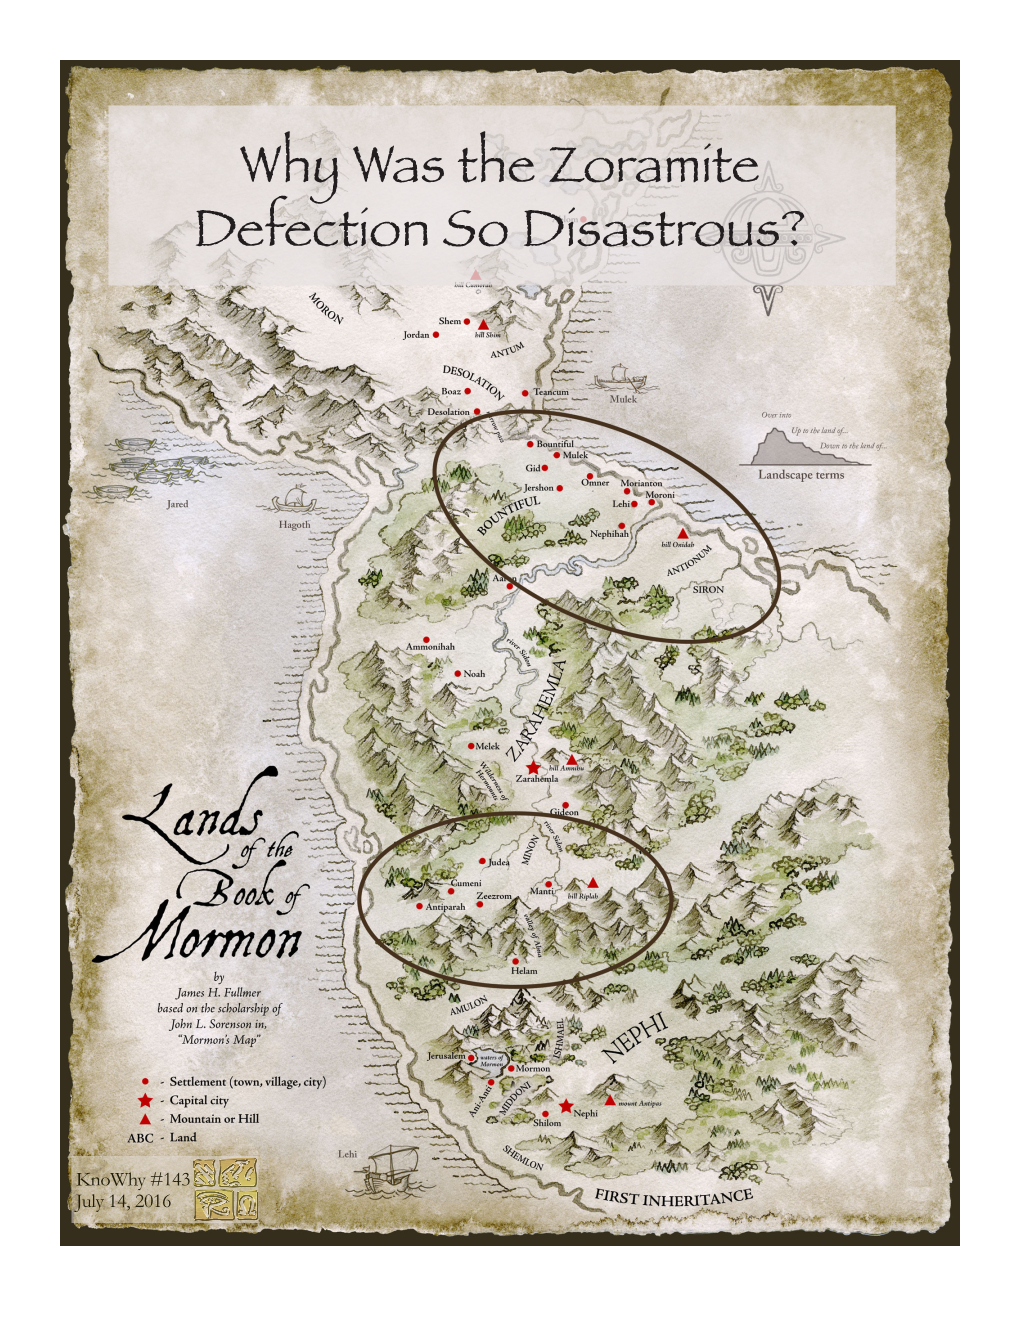 Why Was the Zoramite Defection So Disastrous?